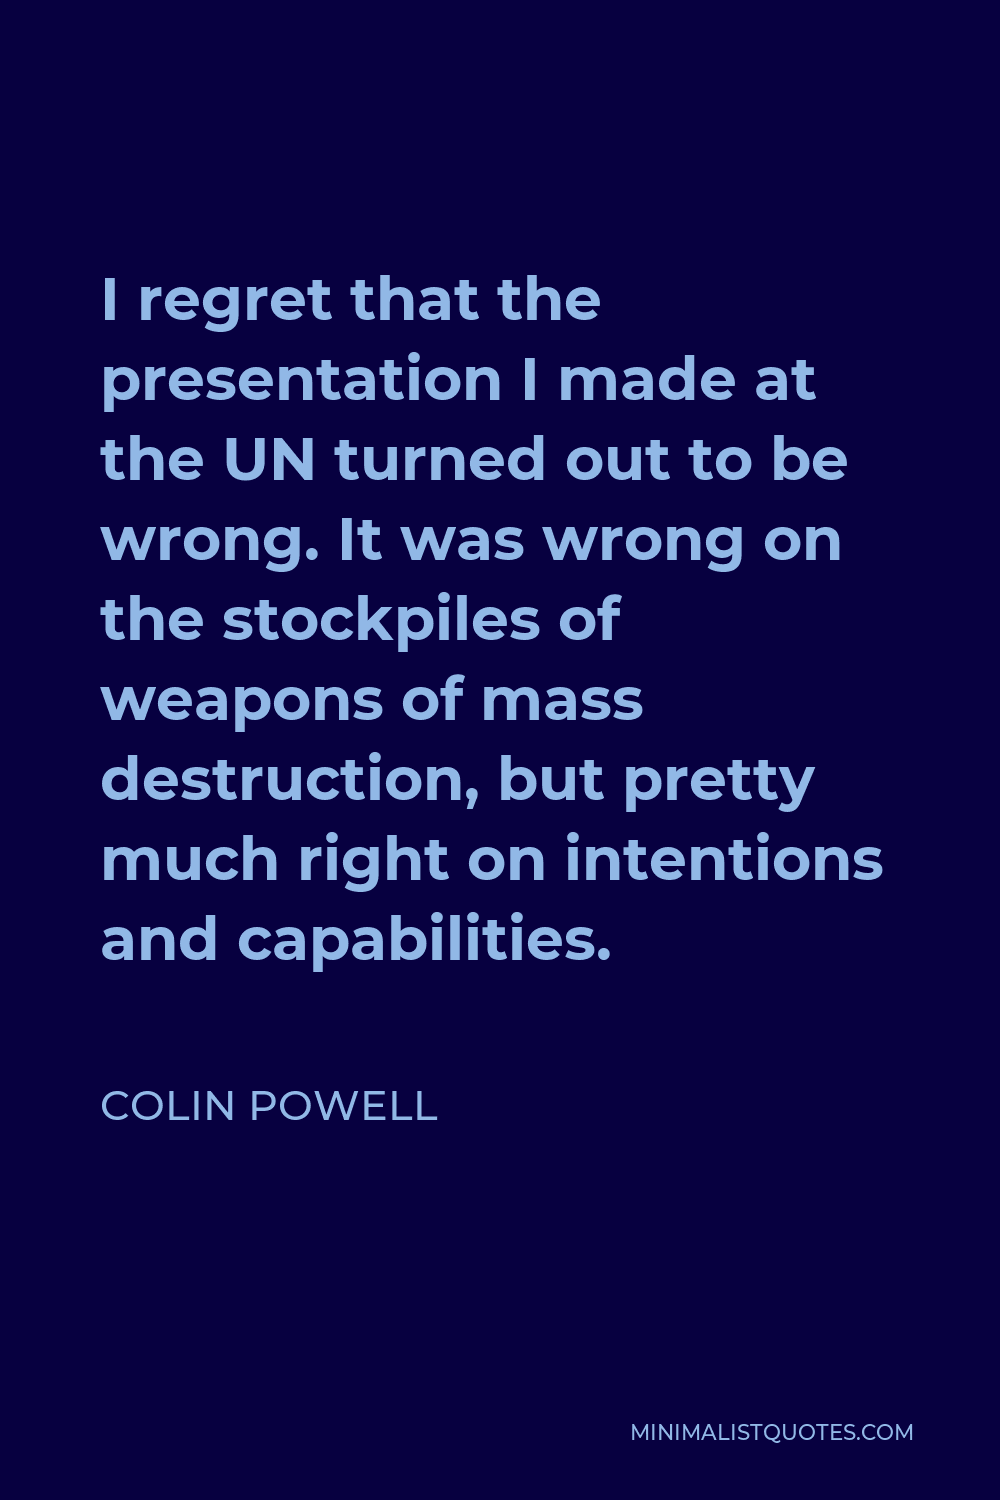 Colin Powell Quote - I regret that the presentation I made at the UN turned out to be wrong. It was wrong on the stockpiles of weapons of mass destruction, but pretty much right on intentions and capabilities.